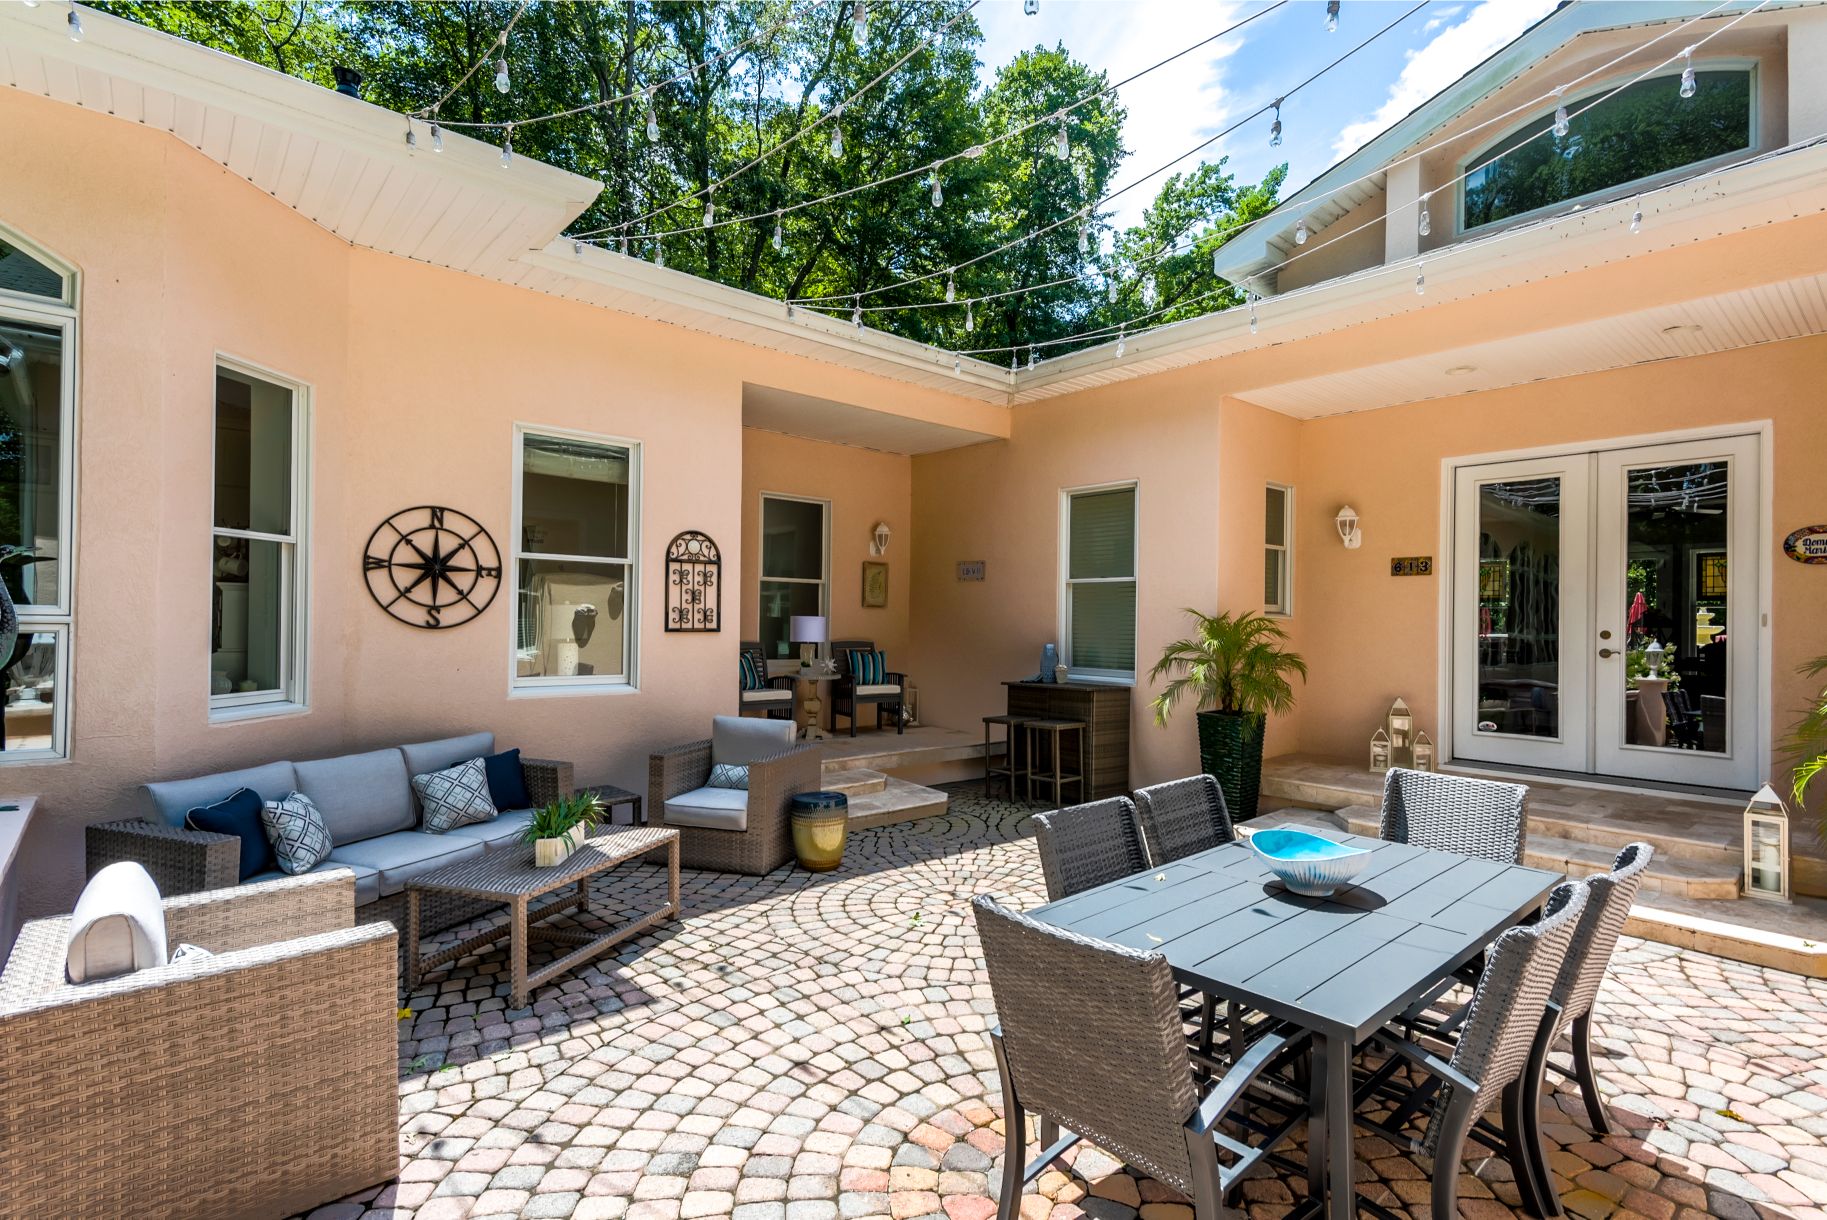 Addition in Juniper Court, Ocean Pines MD - Patio Area with Rattan Furniture and Round Paving